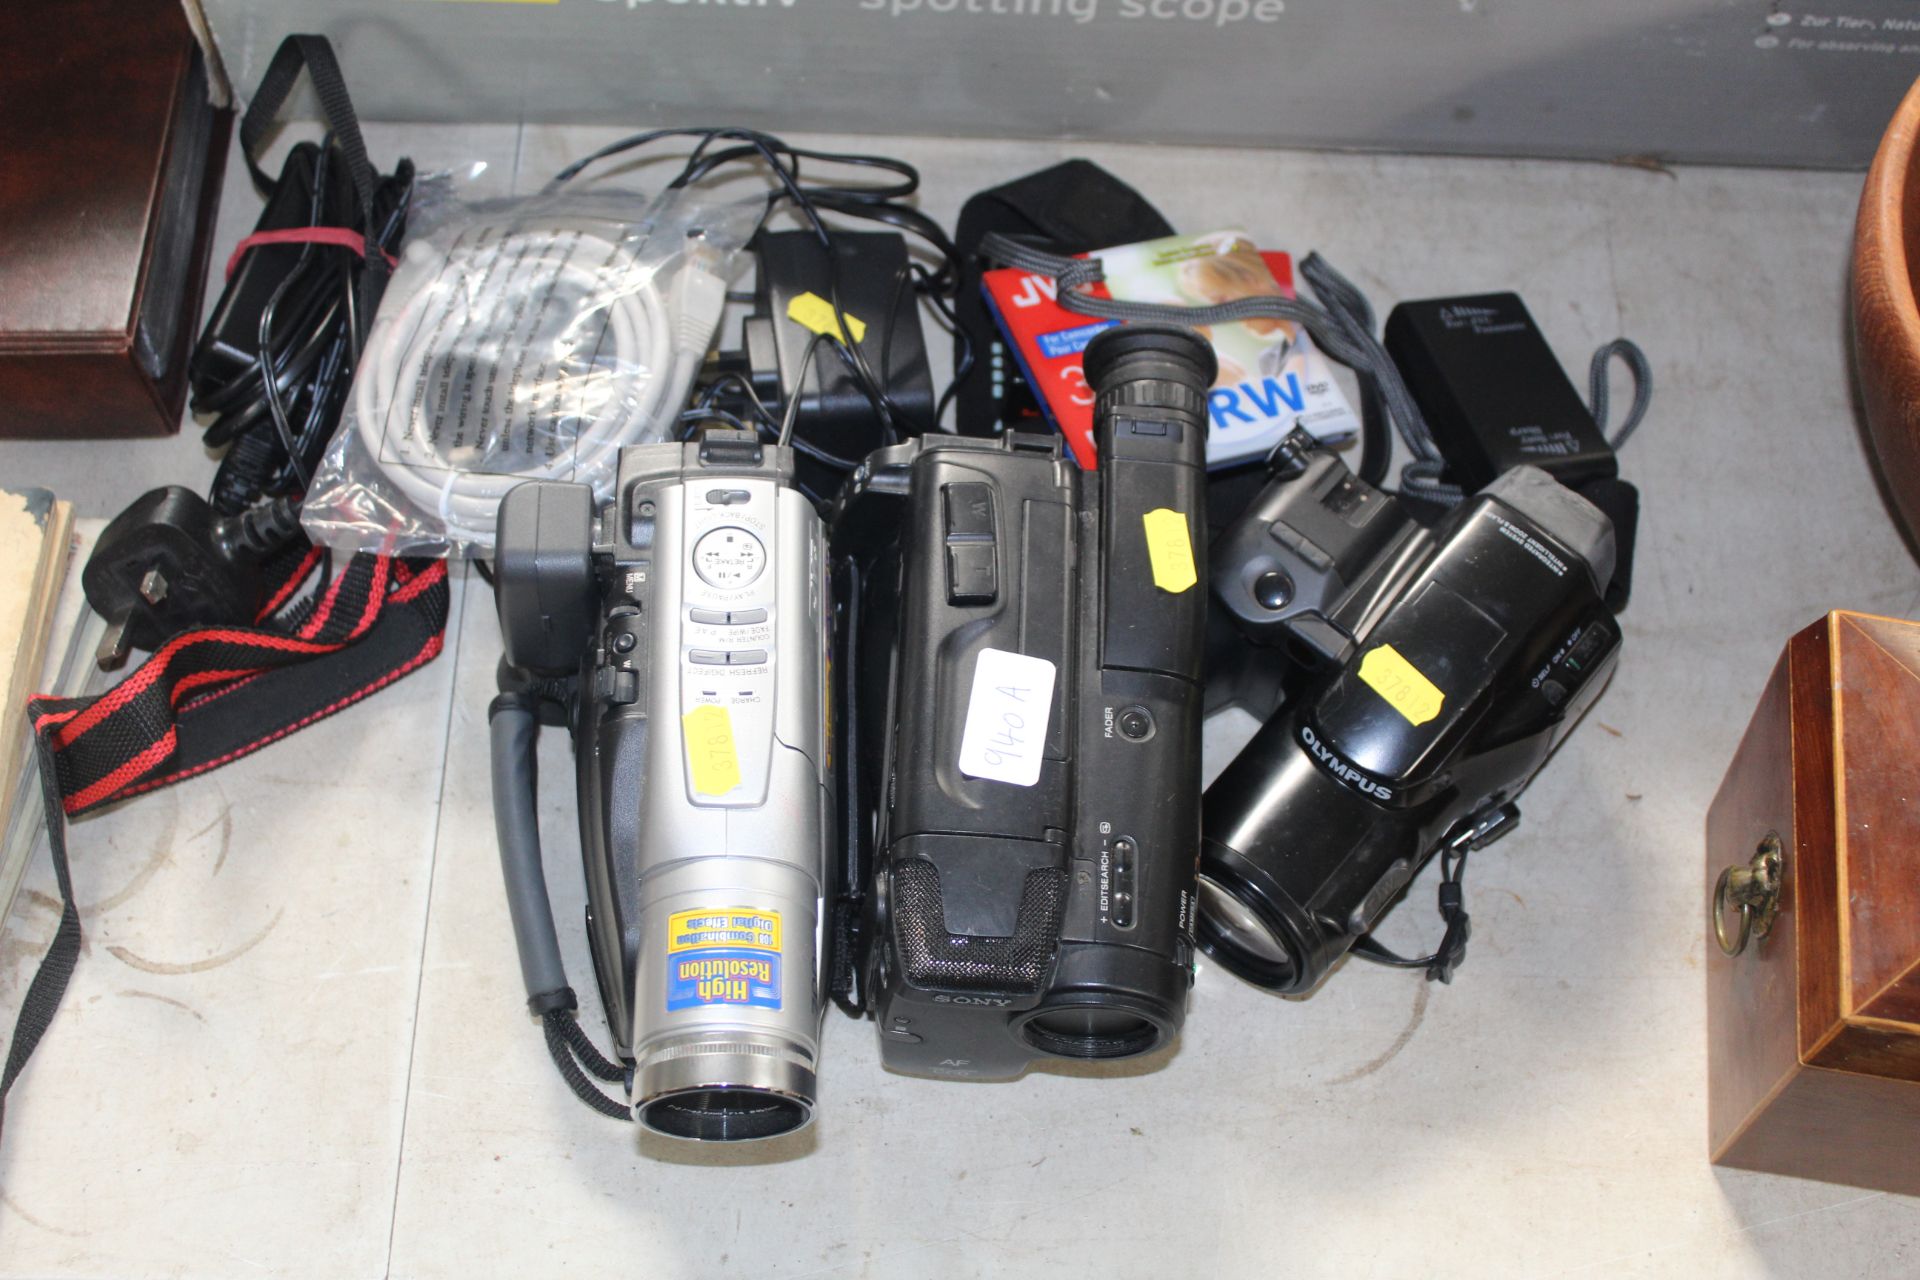 Three various camcorders and accessories